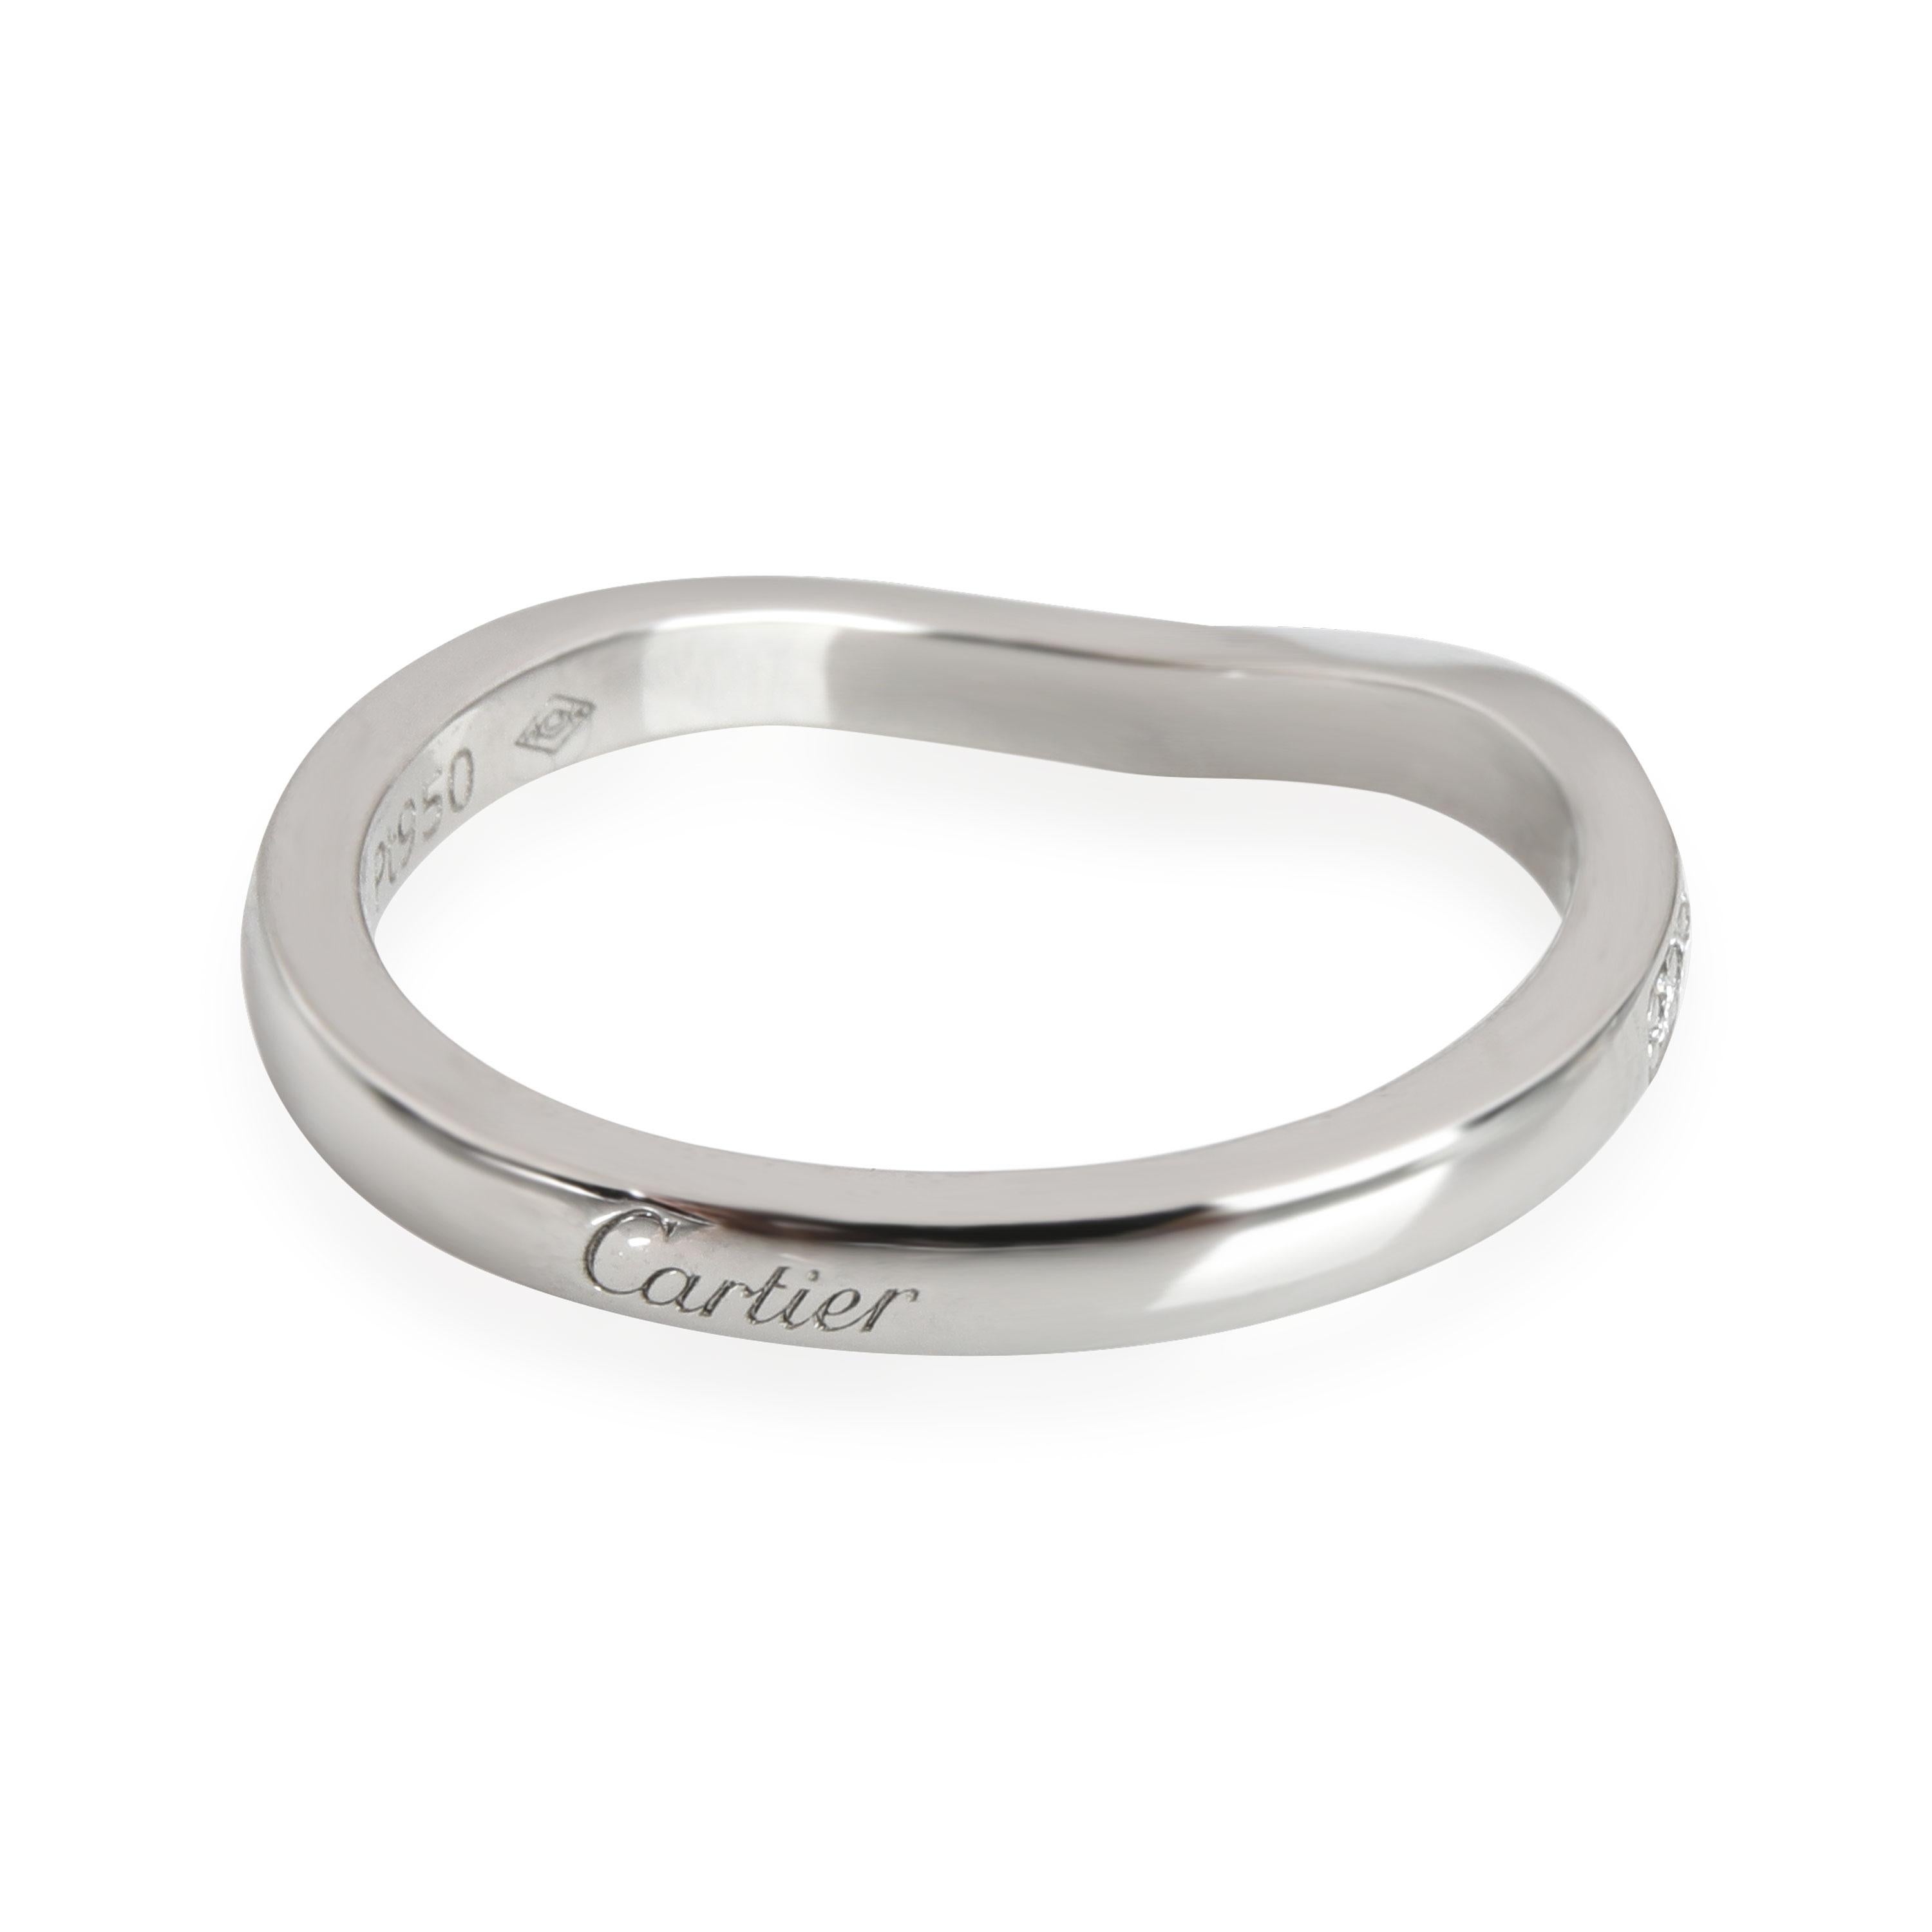 Cartier Ballerine Curved Diamond Band in Platinum 0.09 CTW

PRIMARY DETAILS
SKU: 113985
Listing Title: Cartier Ballerine Curved Diamond Band in Platinum 0.09 CTW
Condition Description: Retails for 3500 USD. In excellent condition and recently